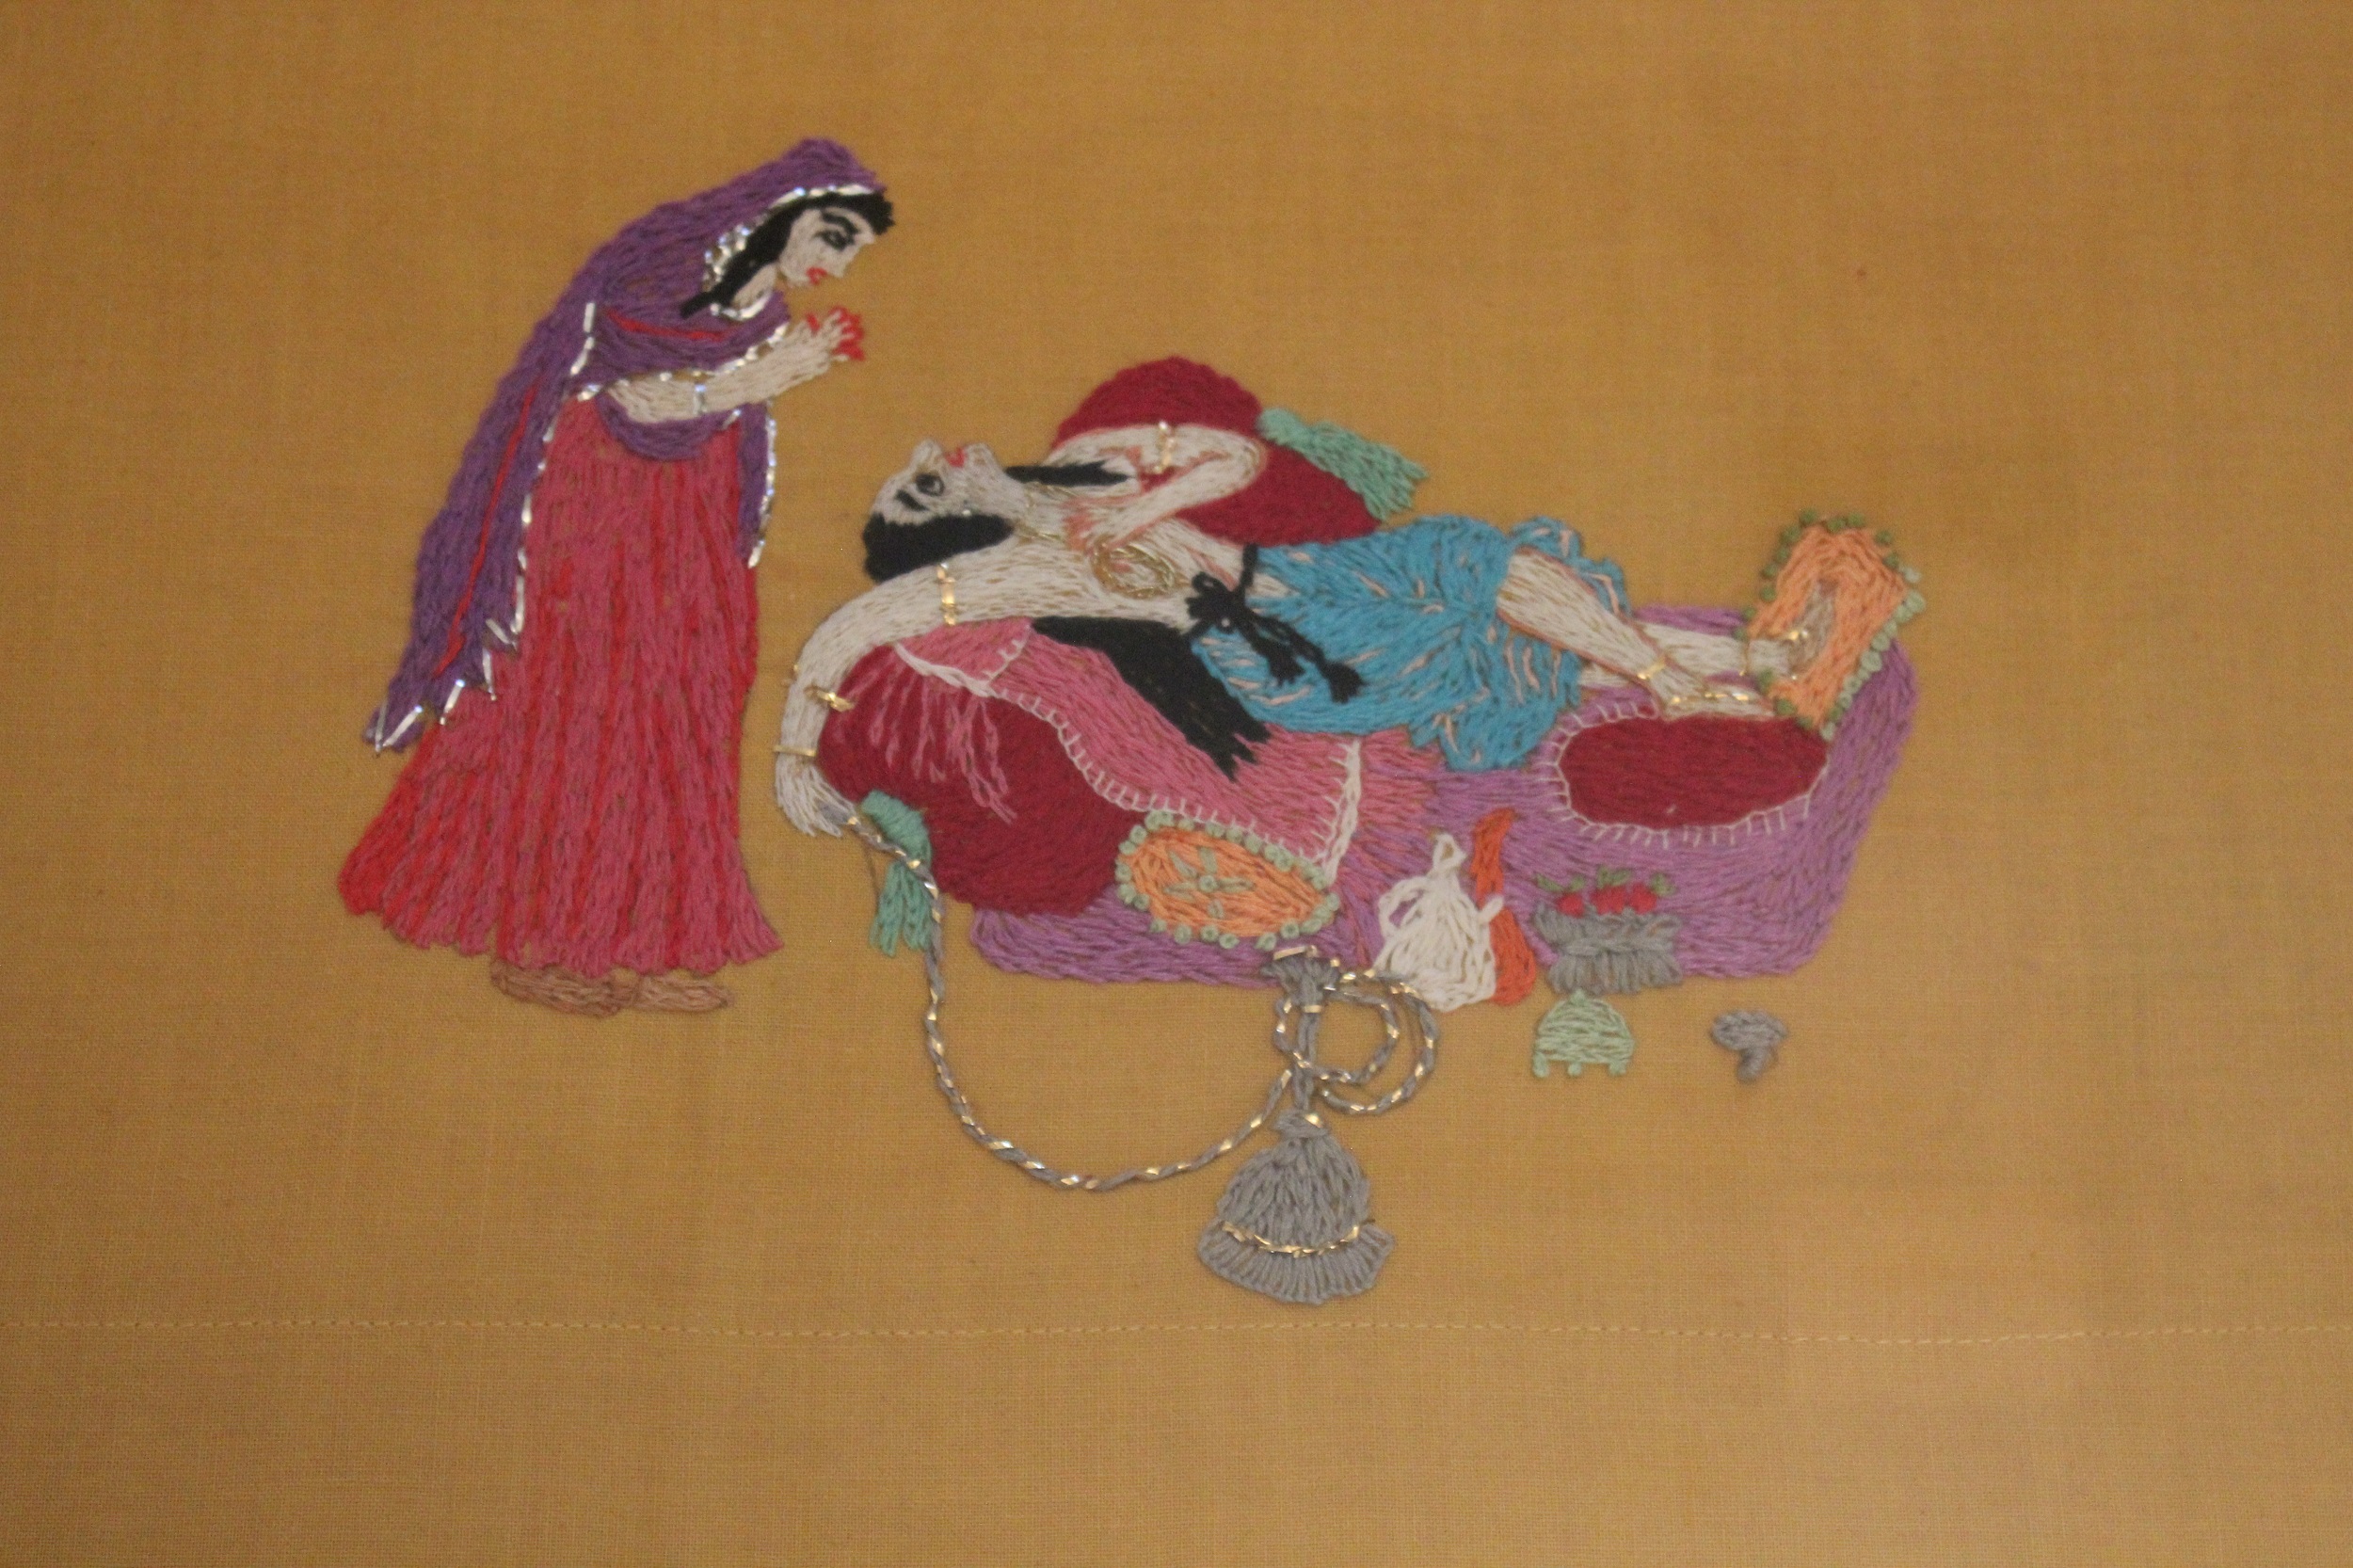 Embroidered scene of a woman in along purple veil bending over another woman lying on a couch with a hookah pipe